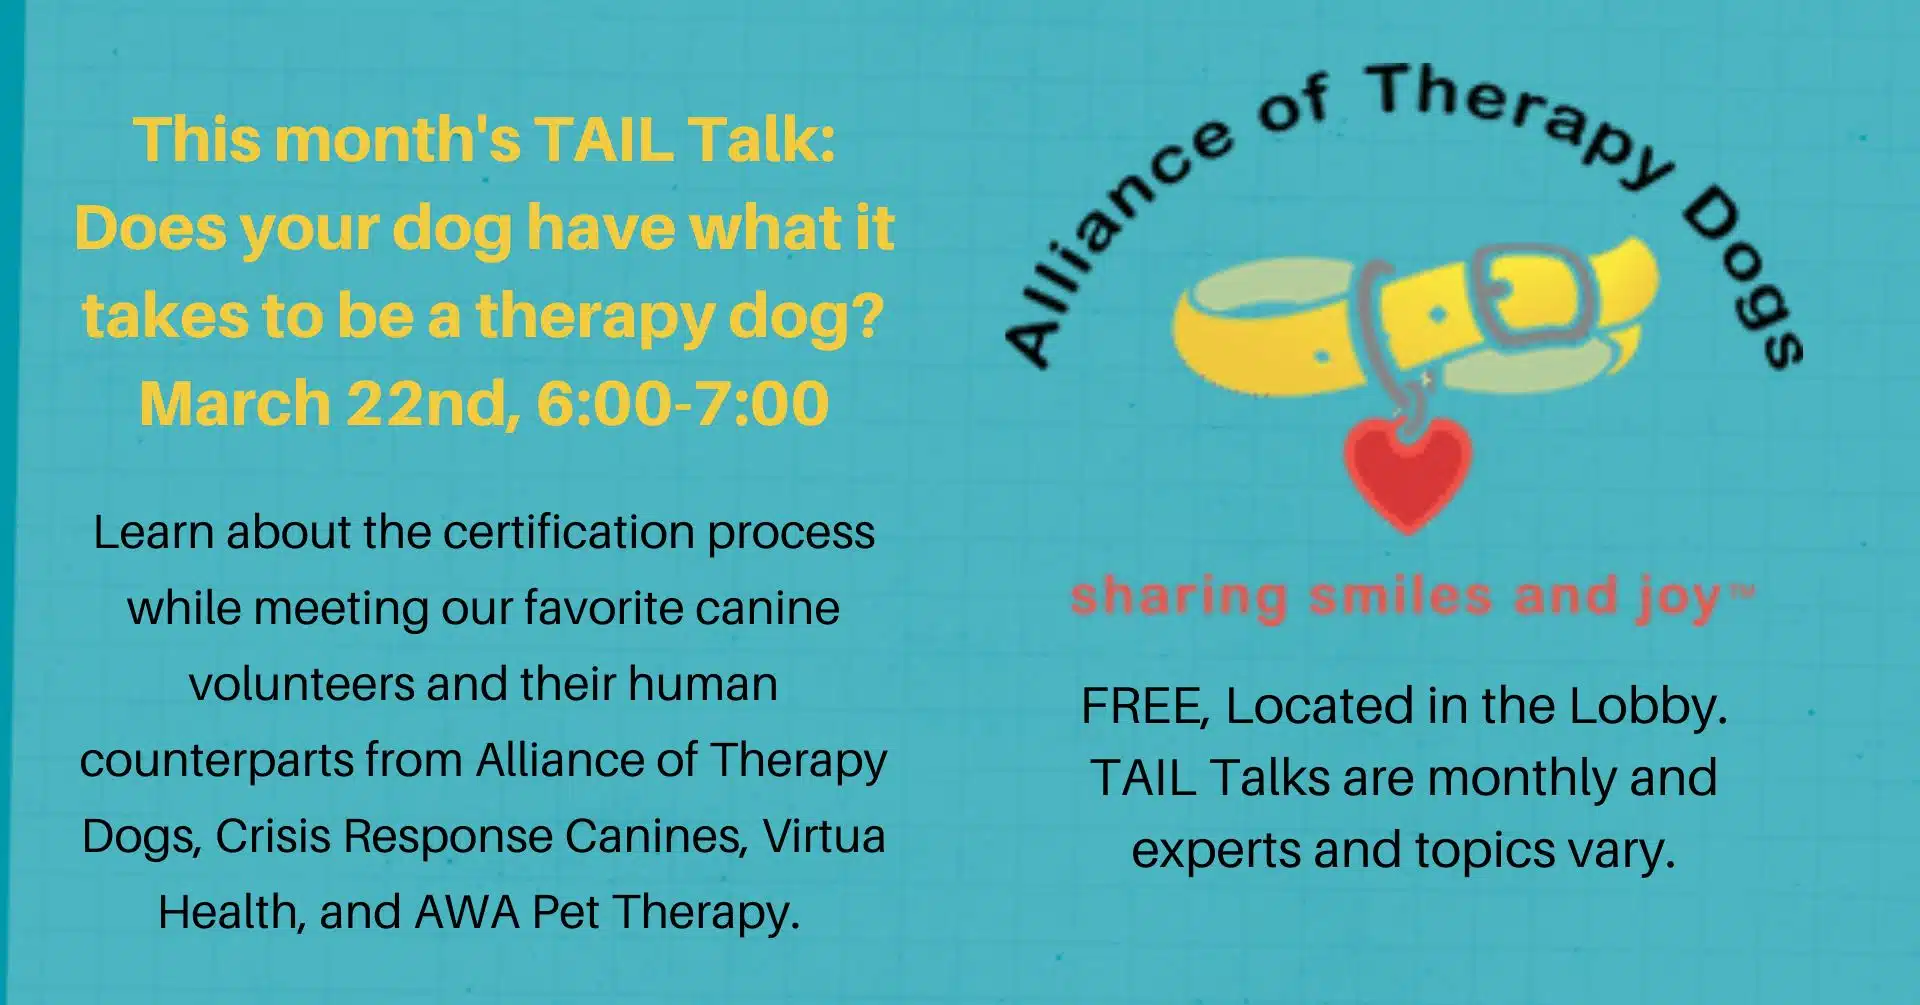 Flyer for Animal Welfare Associations March 2023 Tail Talk forum on therapy dogs.